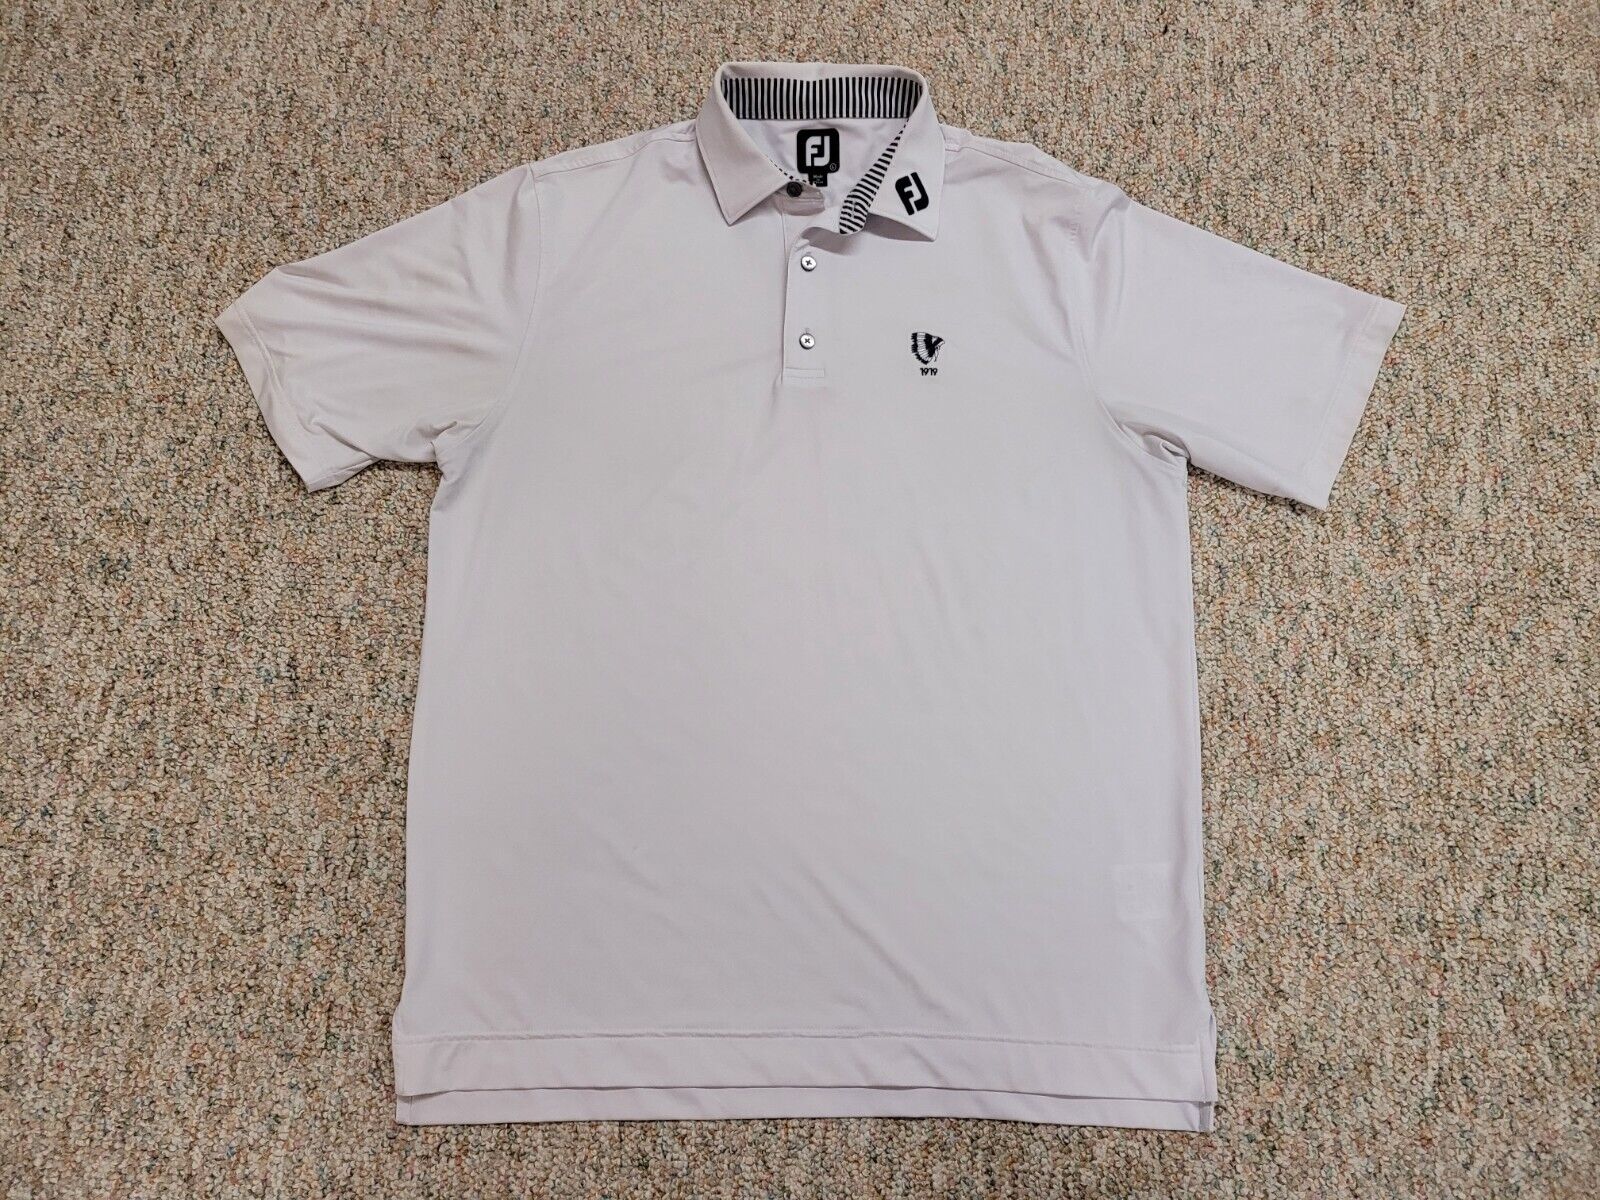 FootJoy Polo Shirt Mens Large White Tour Issued Golf Performance Athletic